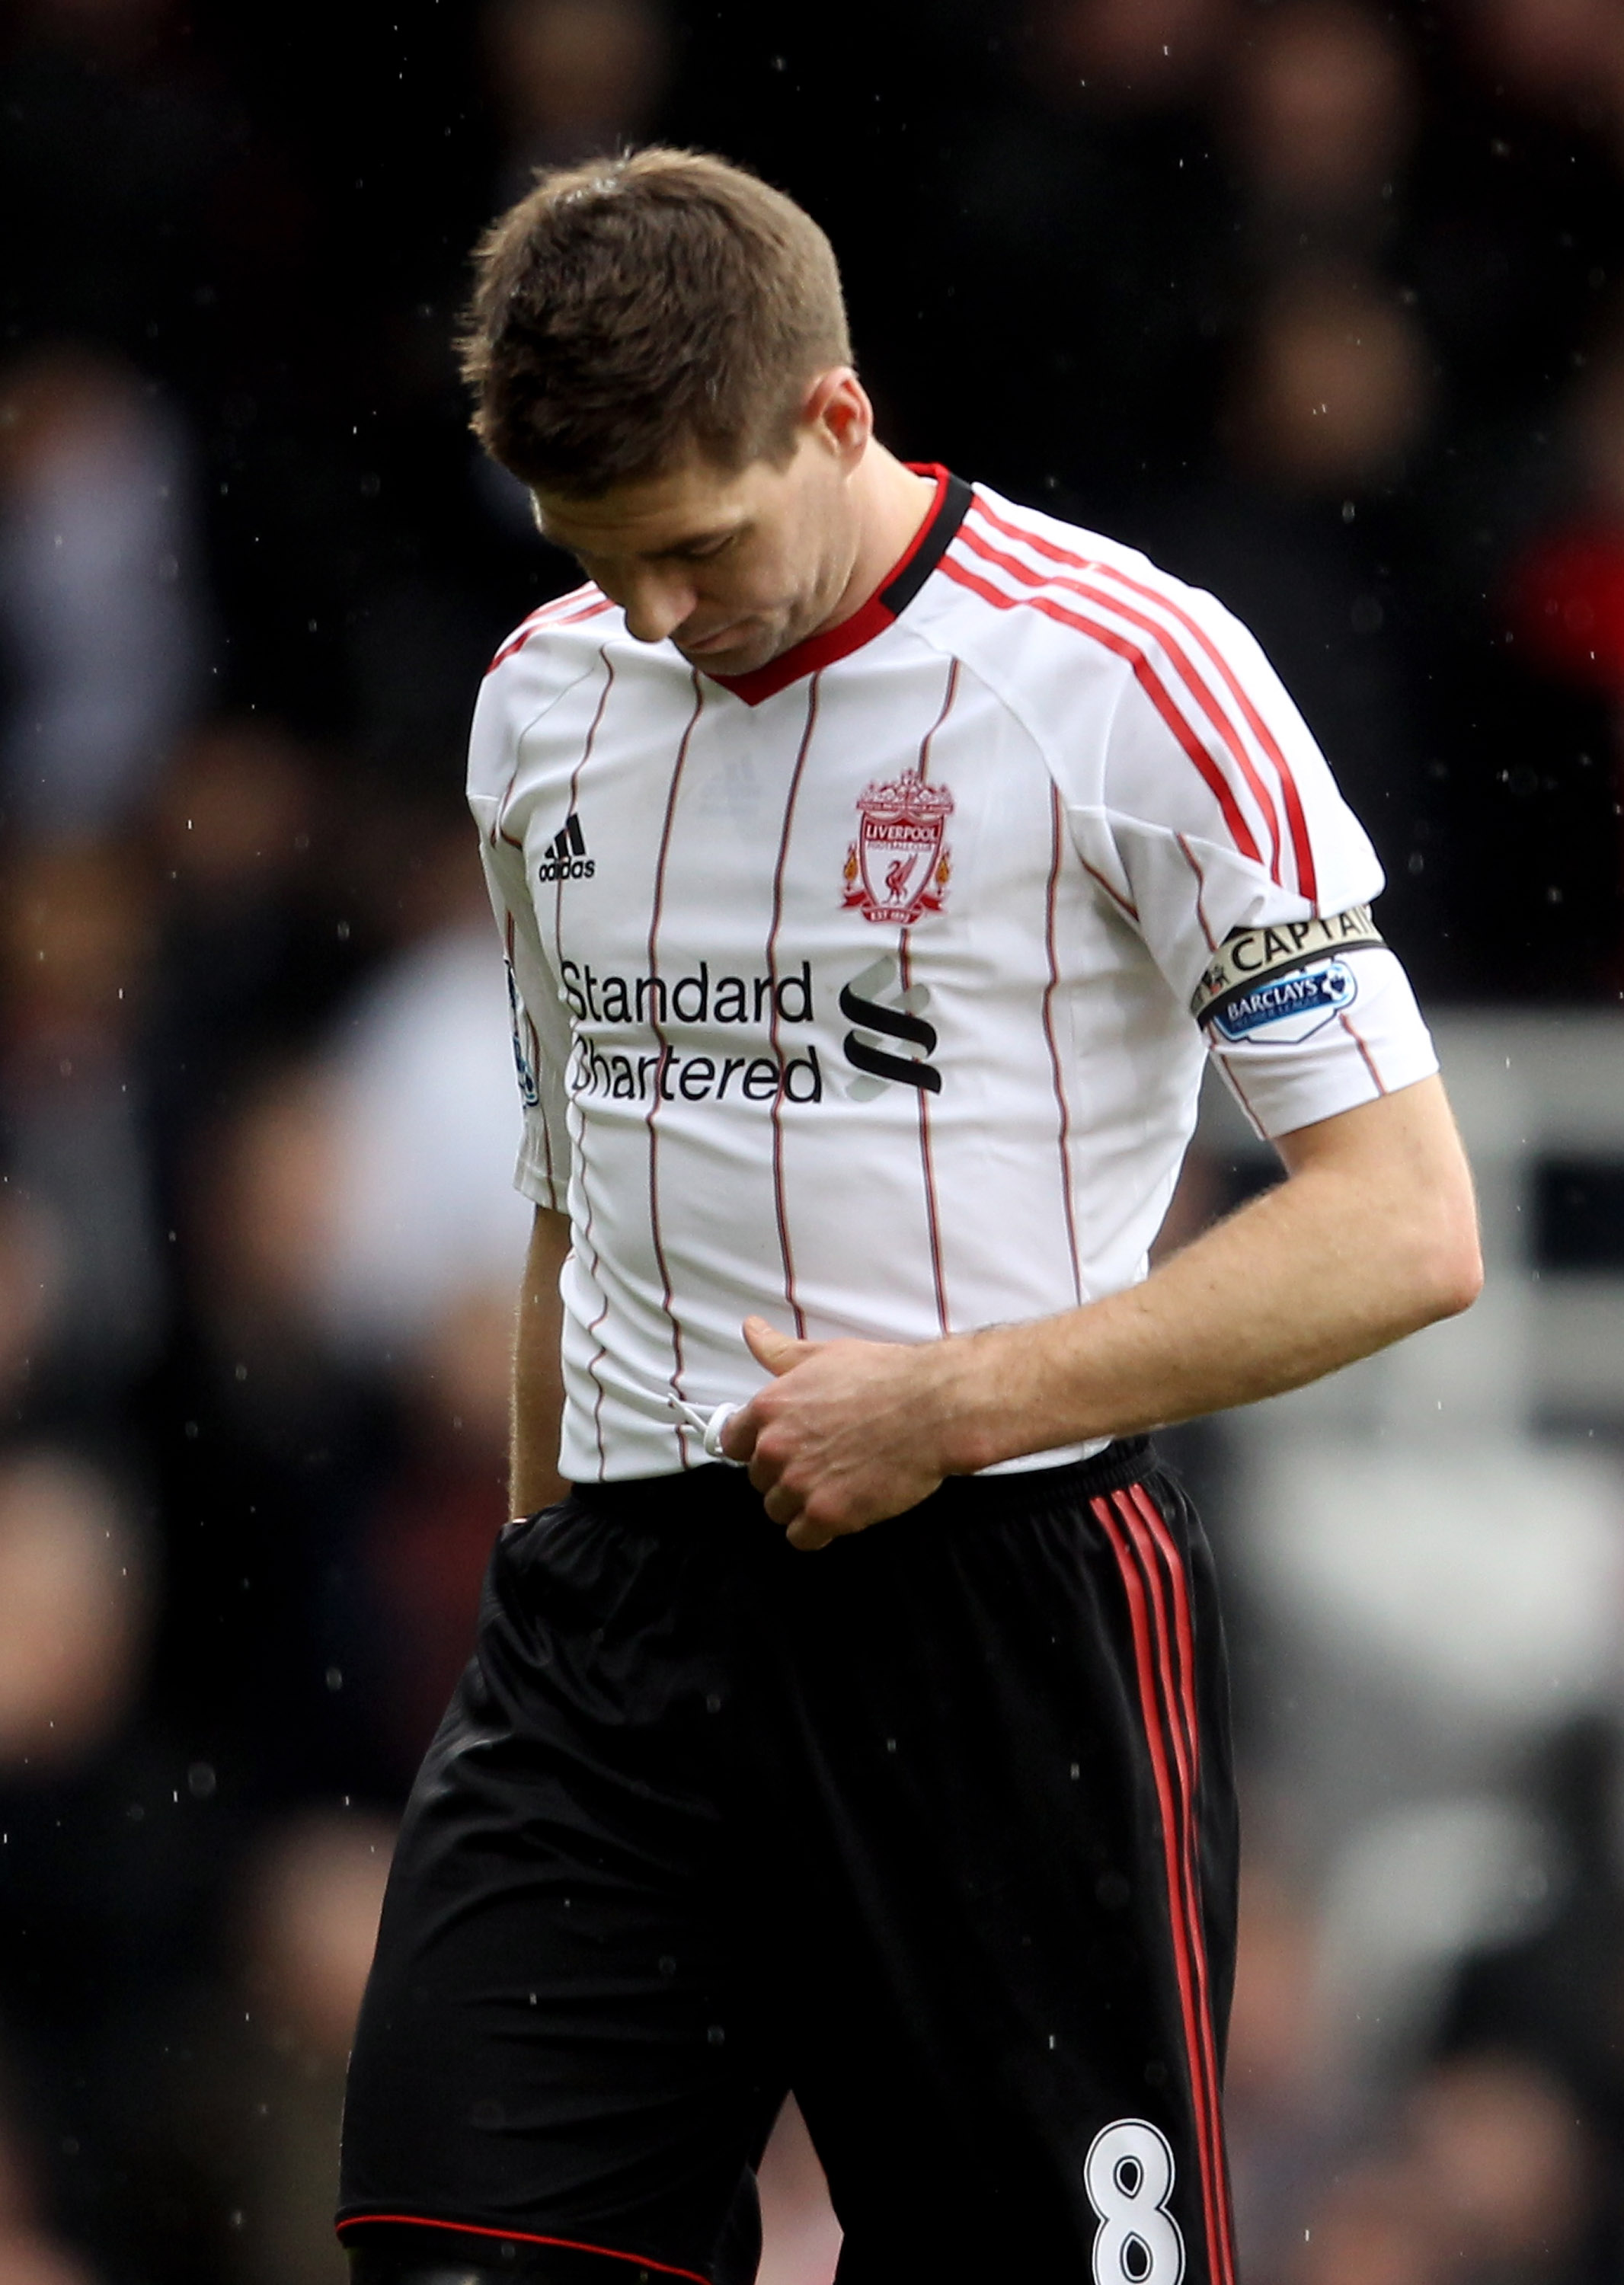 LONDON, ENGLAND - FEBRUARY 27:  Steven Gerrard of Liverpool leaves the pitch dejected at half time during the Barclays Premier League match between West Ham United and Liverpool at the Boleyn Ground on February 27, 2011 in London, England.  (Photo by Scot